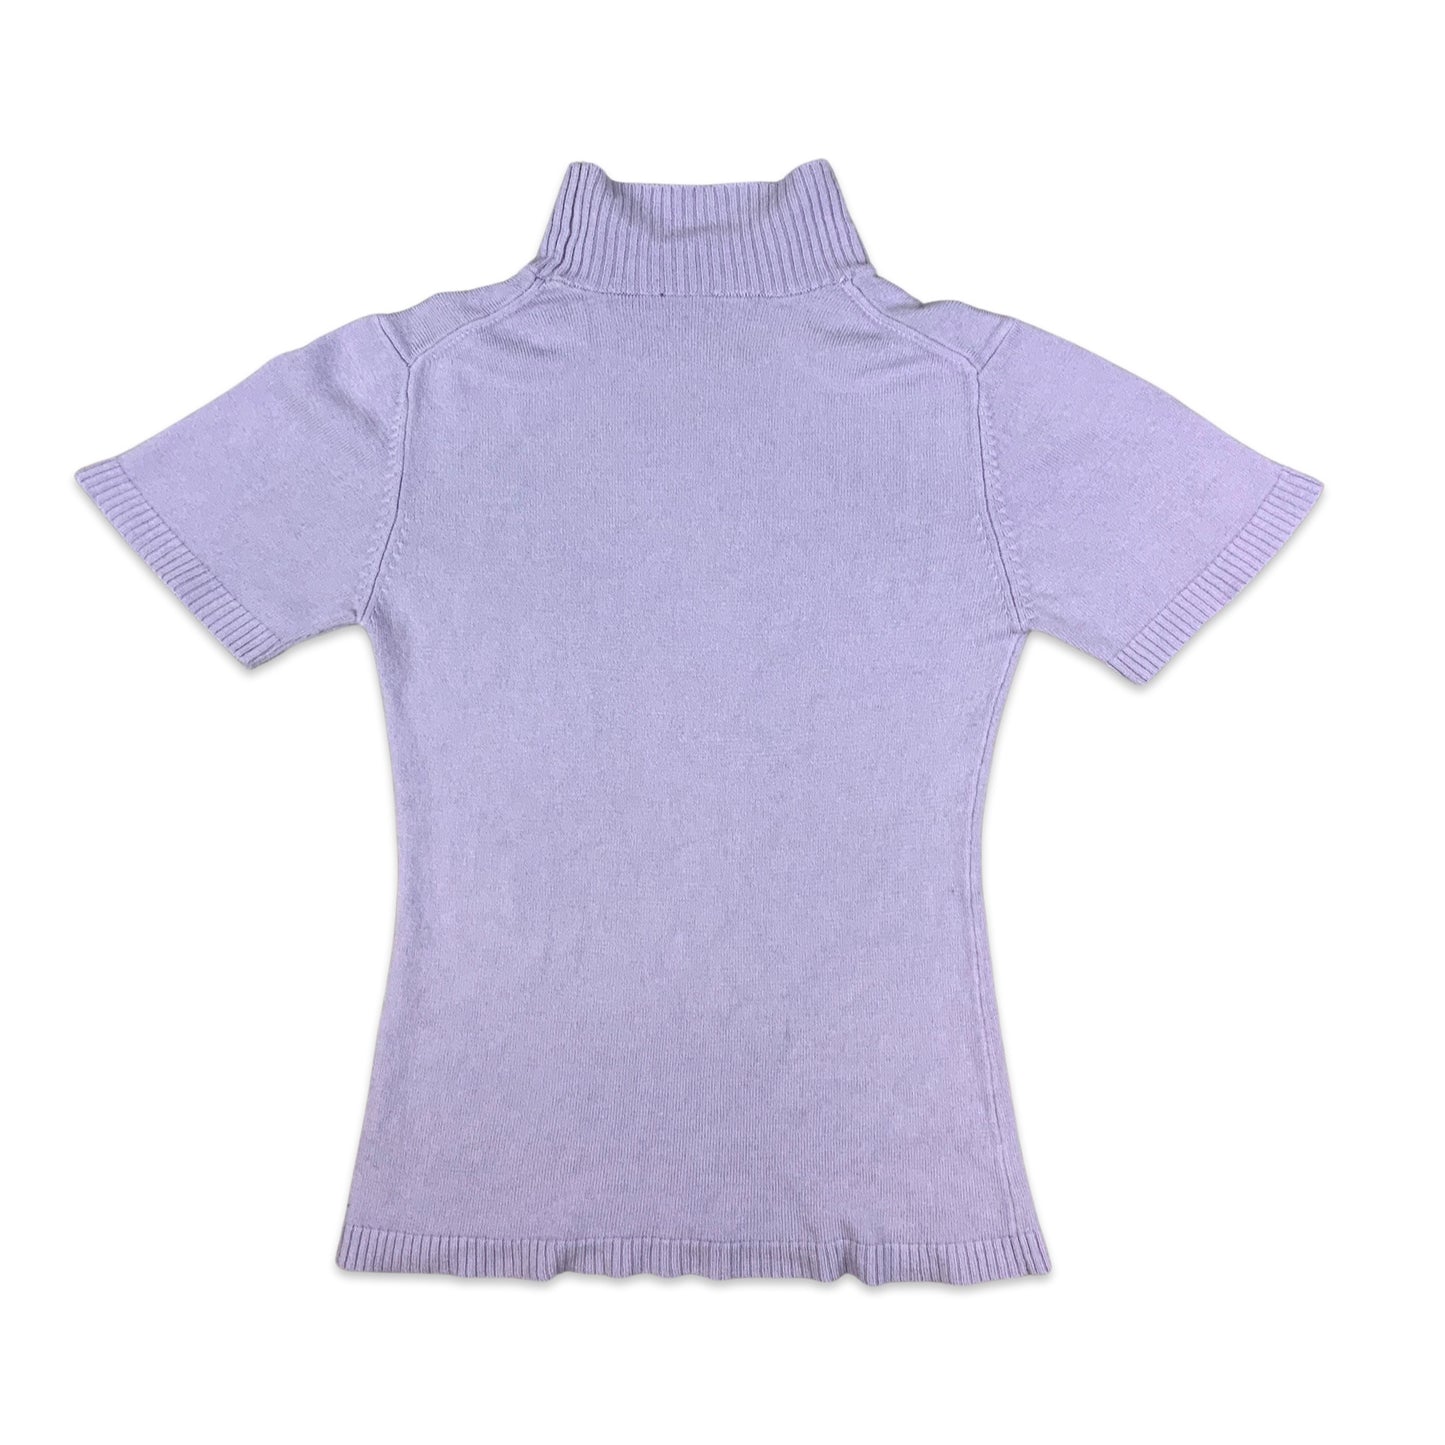 90s Purple Lilac Short Sleeved Jumper Top 8 10